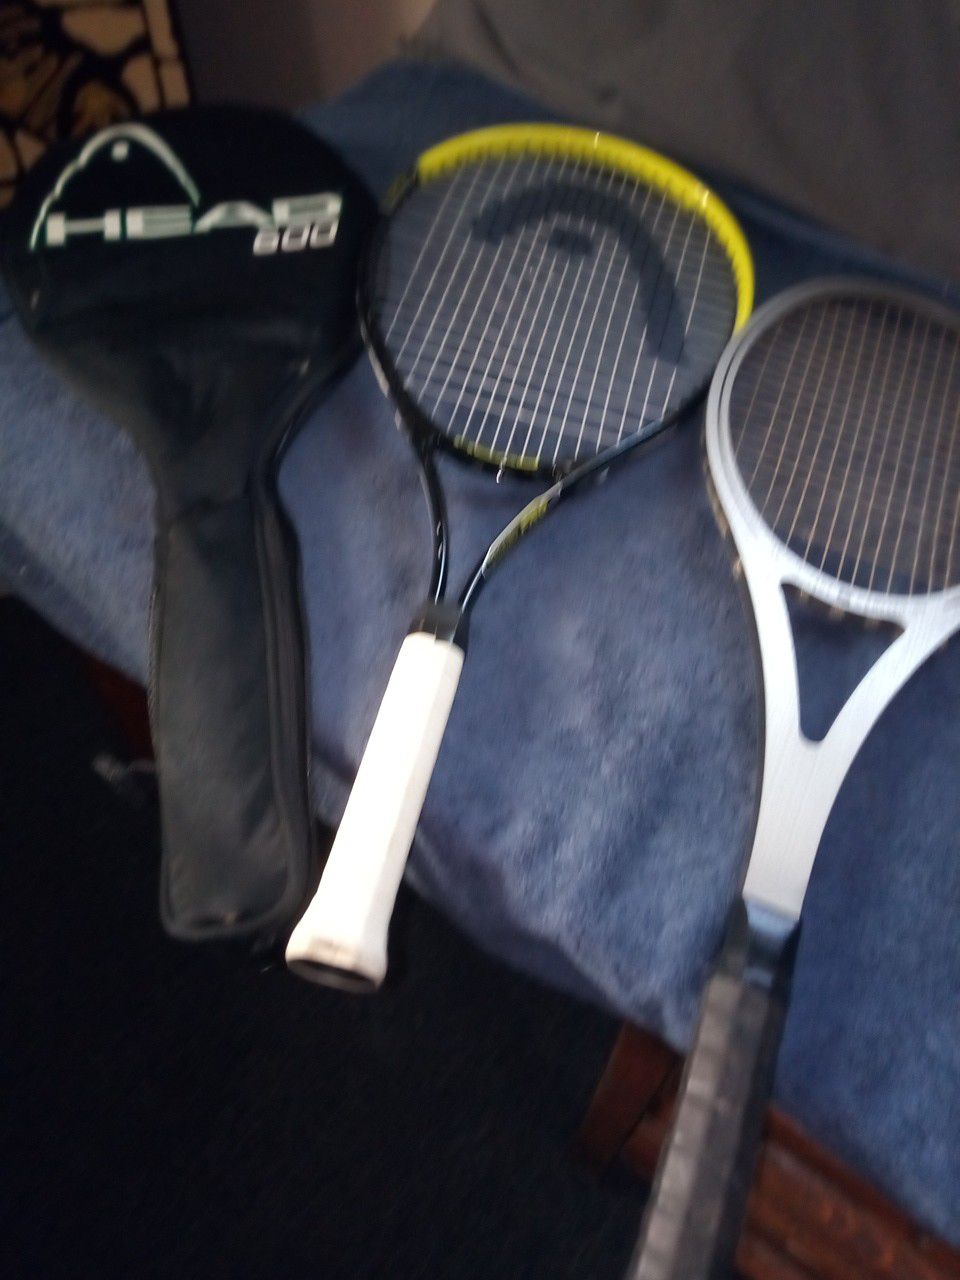 Two very good tennis rackets